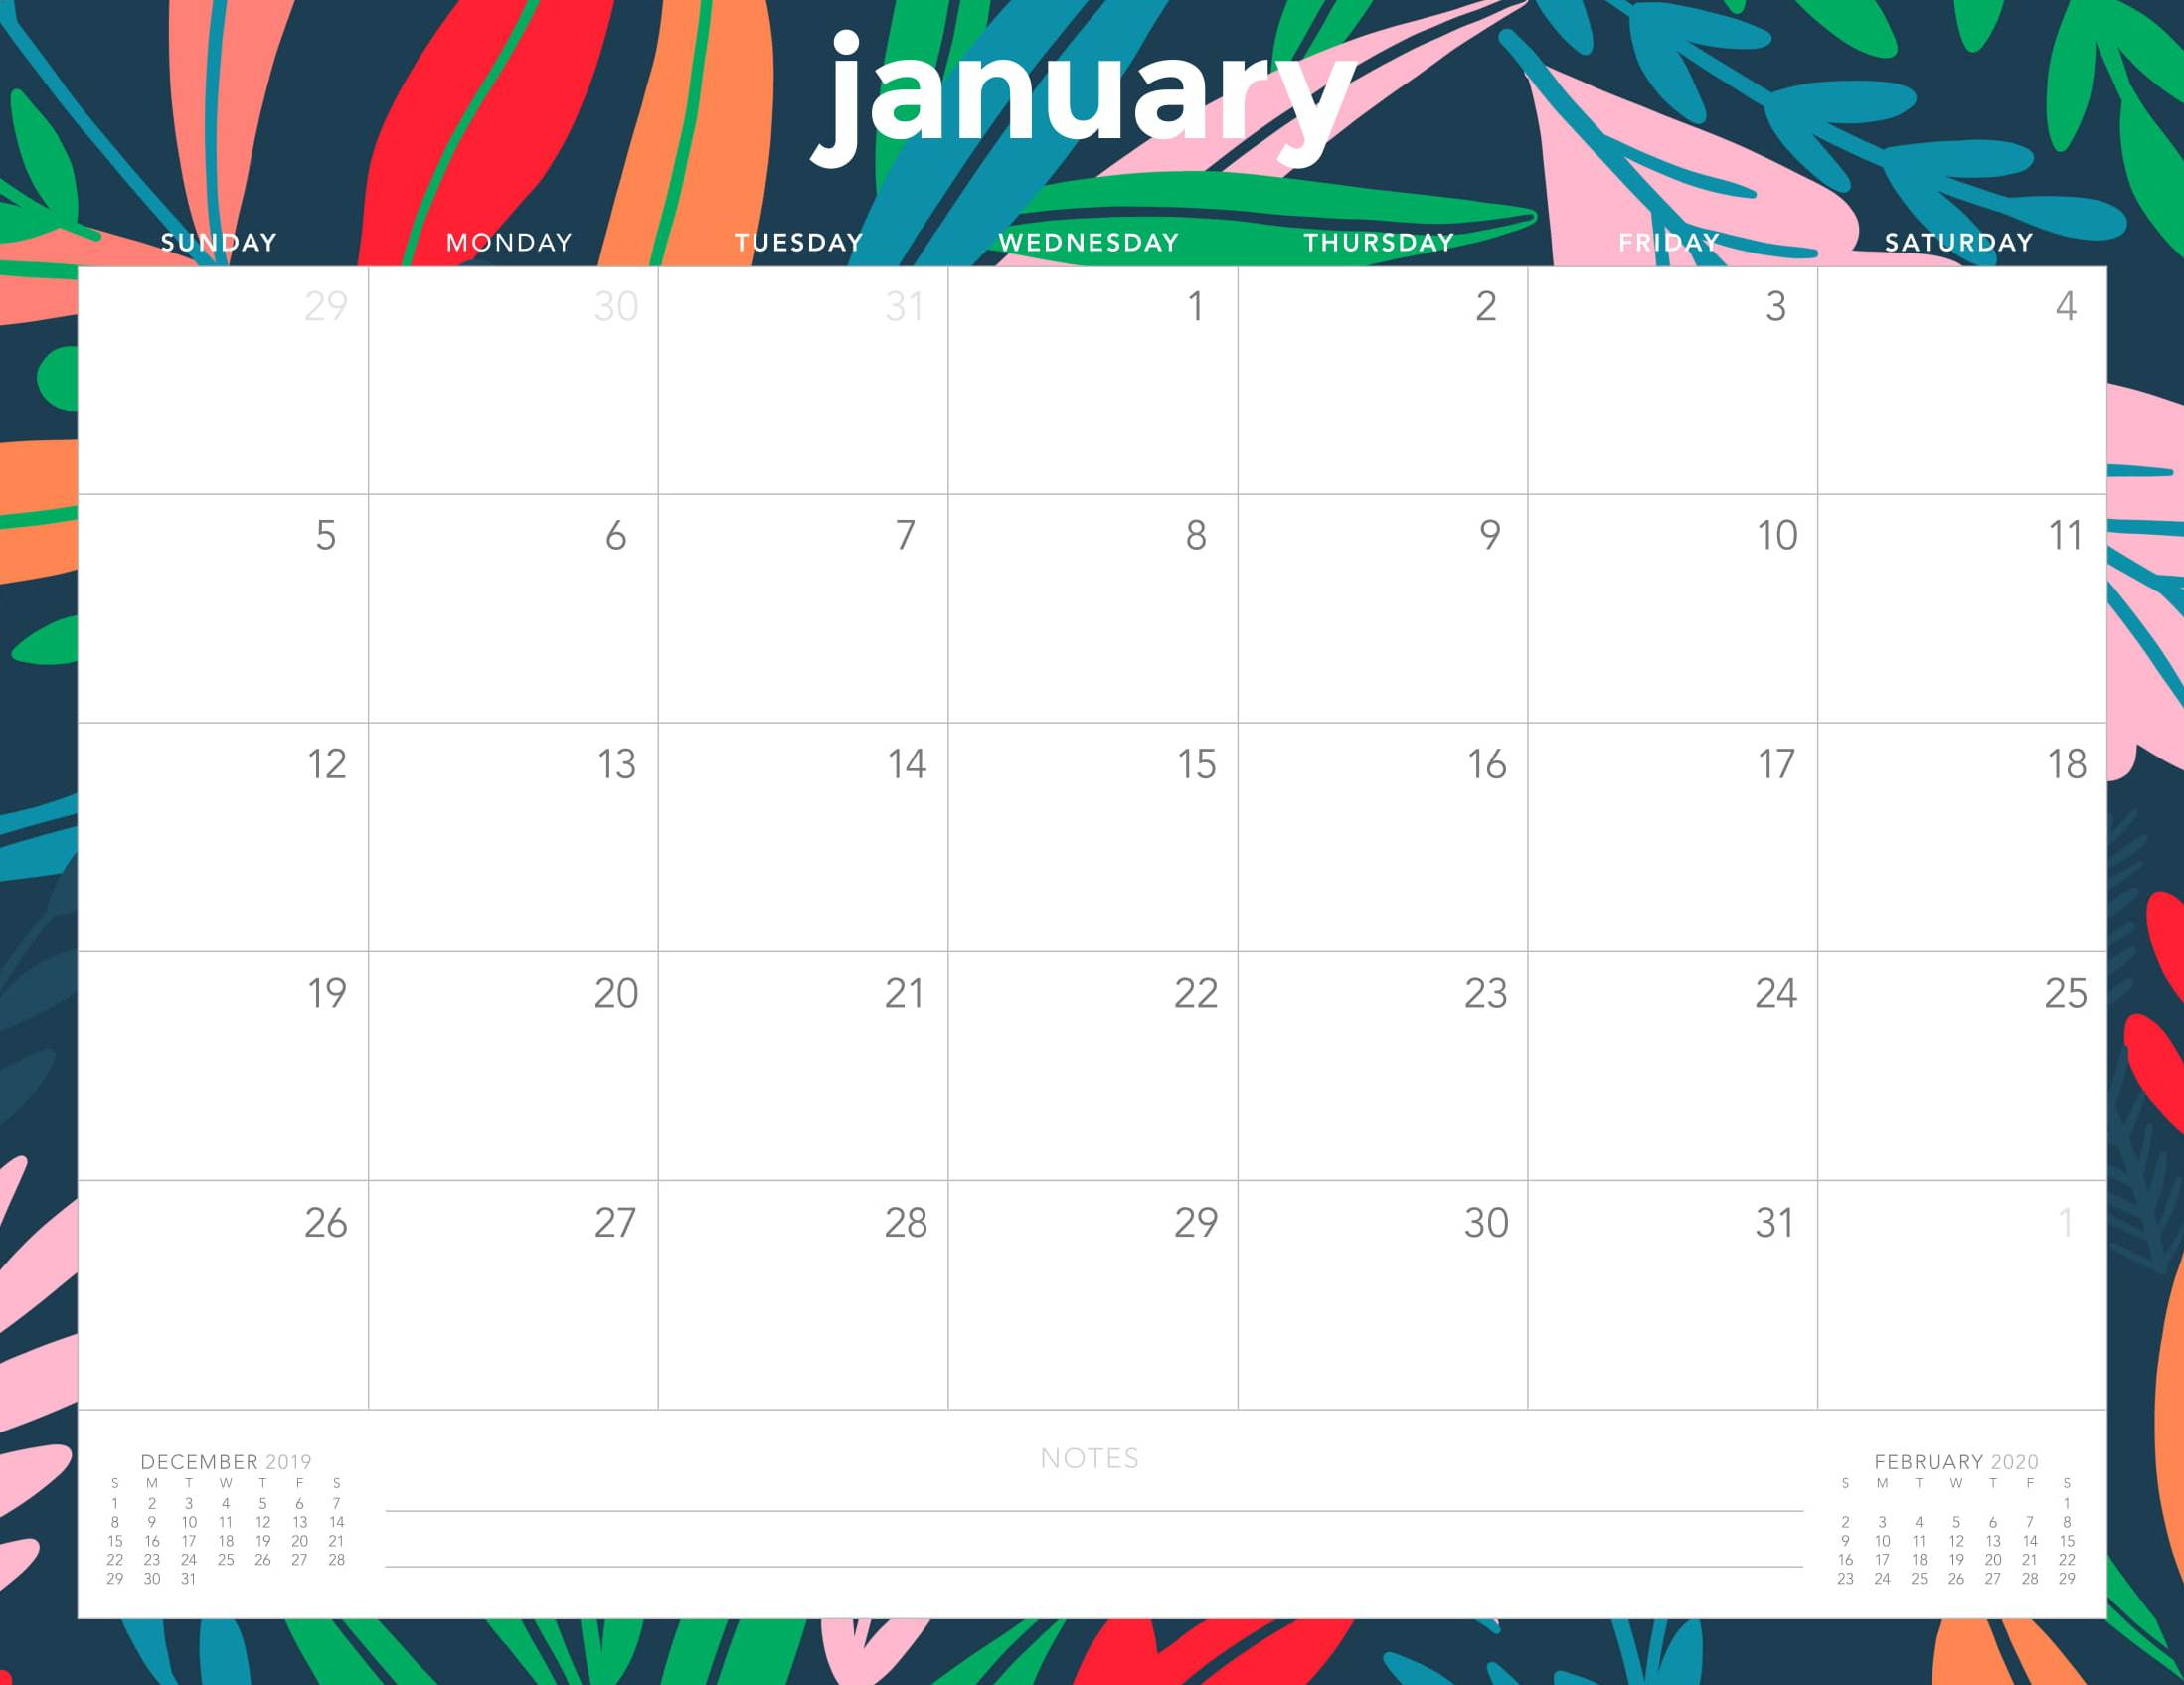 Monthly Calendar For January 2020 Template - Set Your Plan